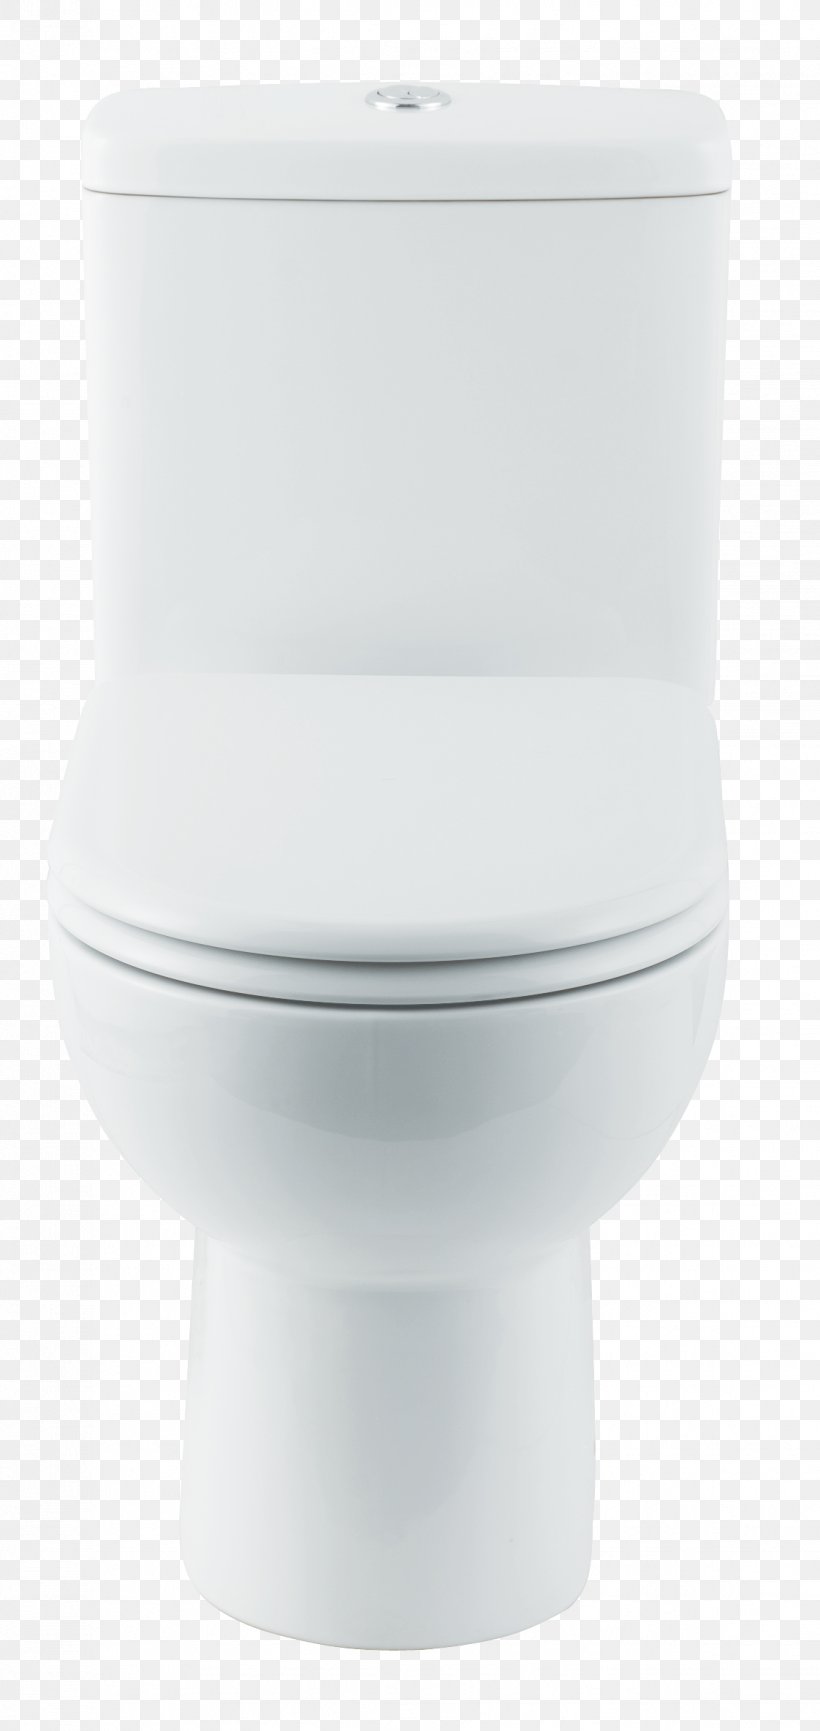 Toilet Seat Tap Bathroom Sink, PNG, 1122x2369px, Plumbing Fixtures, Bathroom, Bathroom Sink, Ceramic, Plumbing Download Free